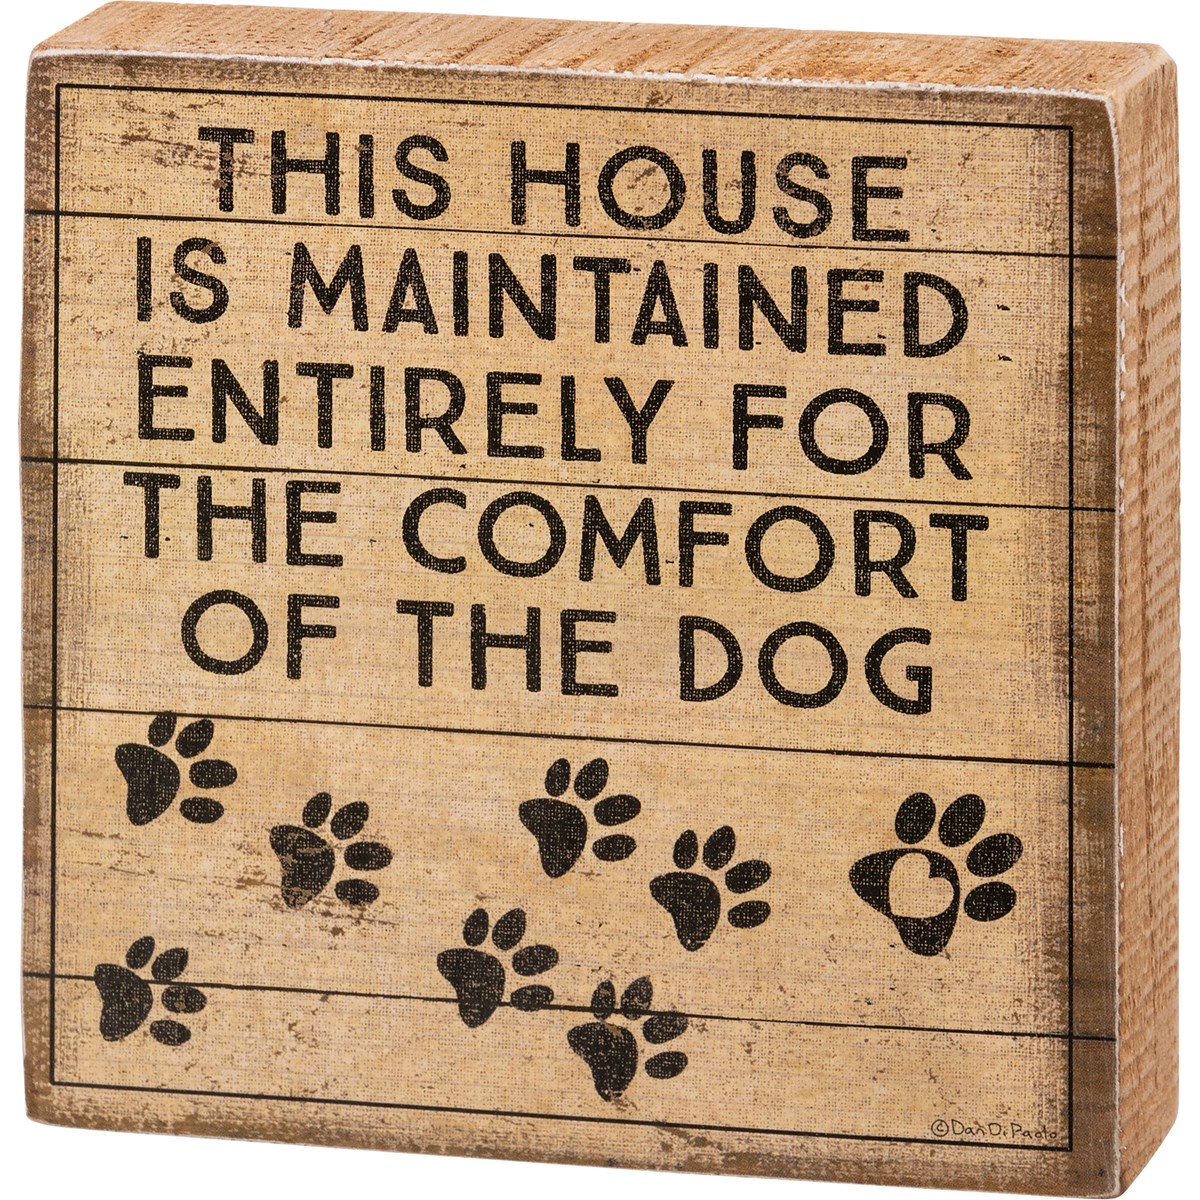 Maintained For The Comfort Of The Dog Block Sign - Wood, Paper